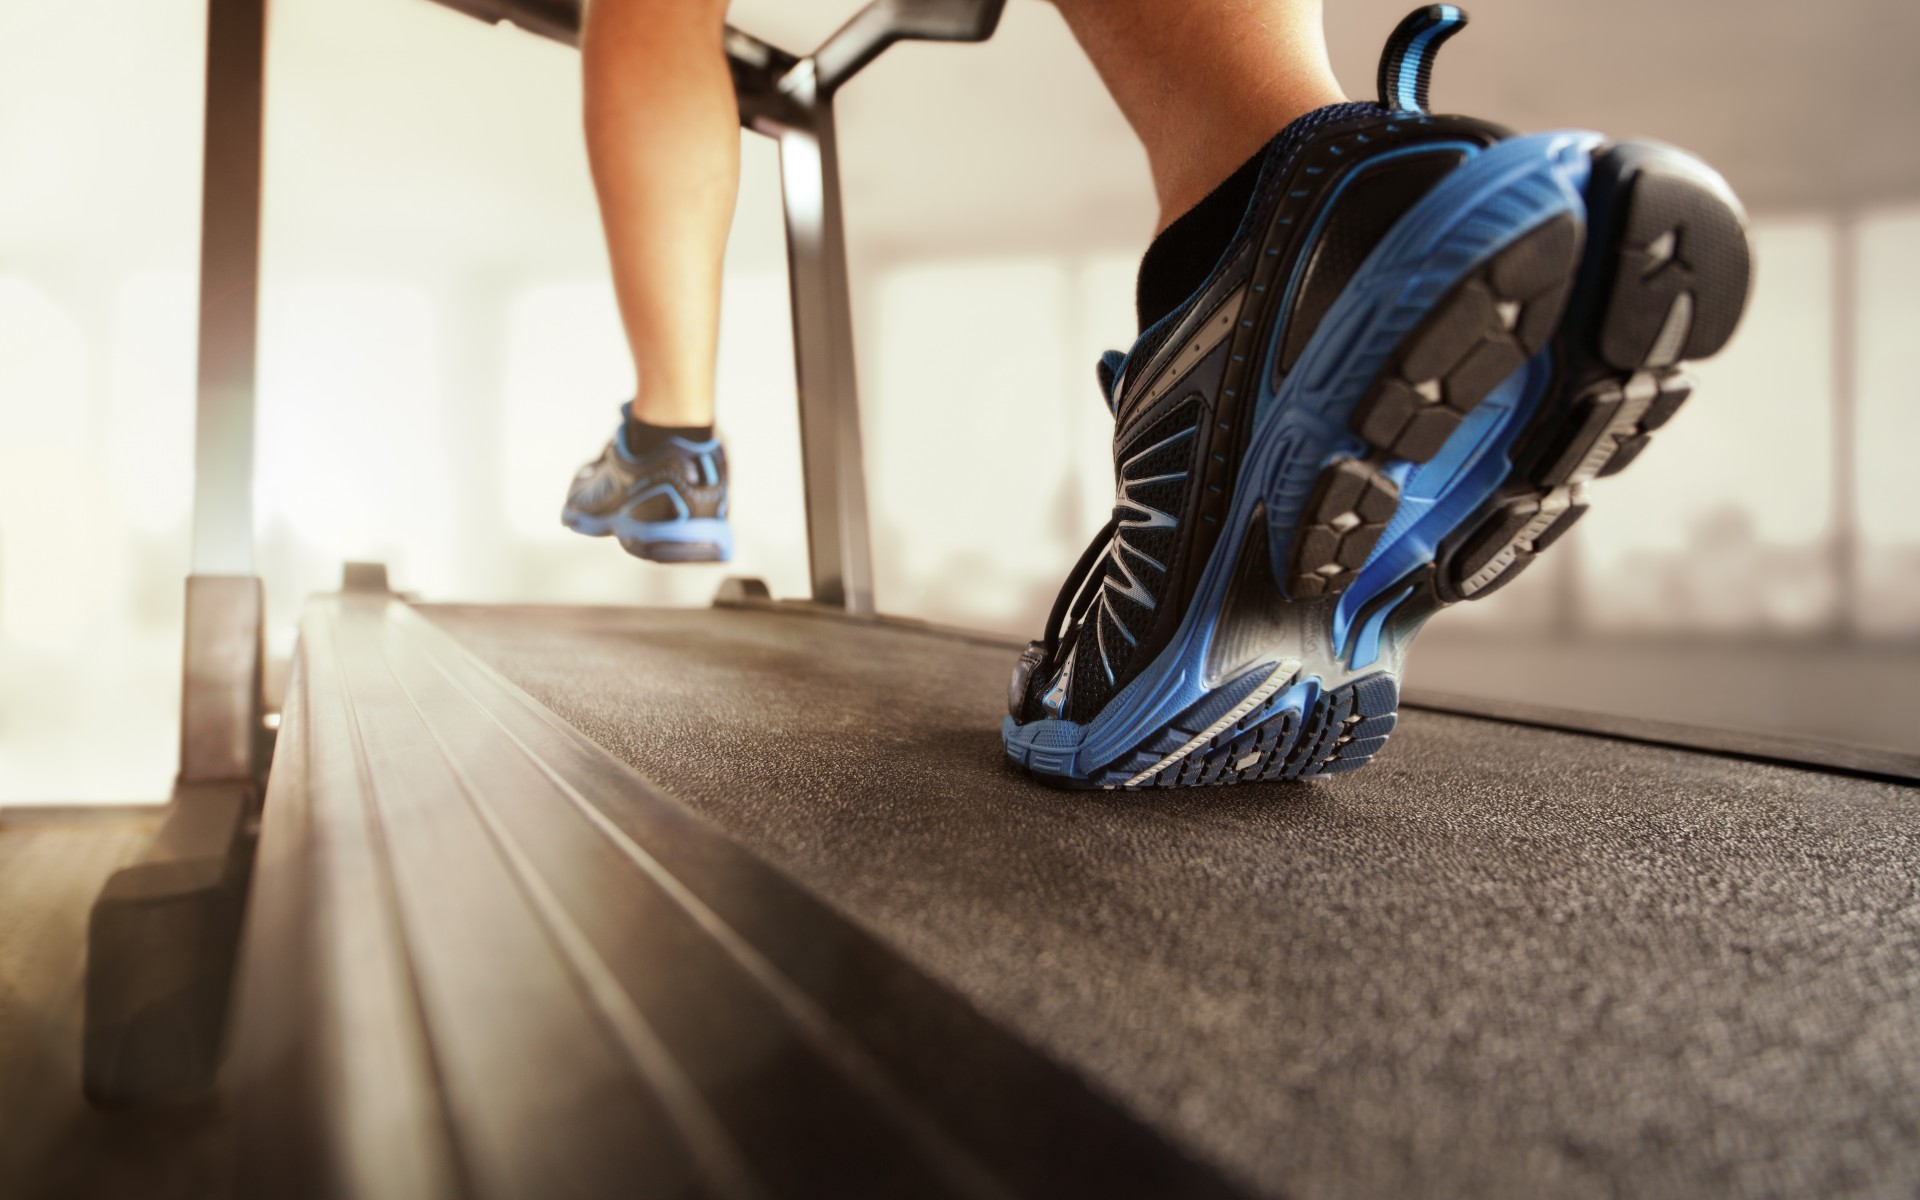 man-wearing-blue-shoes-running-on-treadmill-in-a-gym-room-fitness.jpg